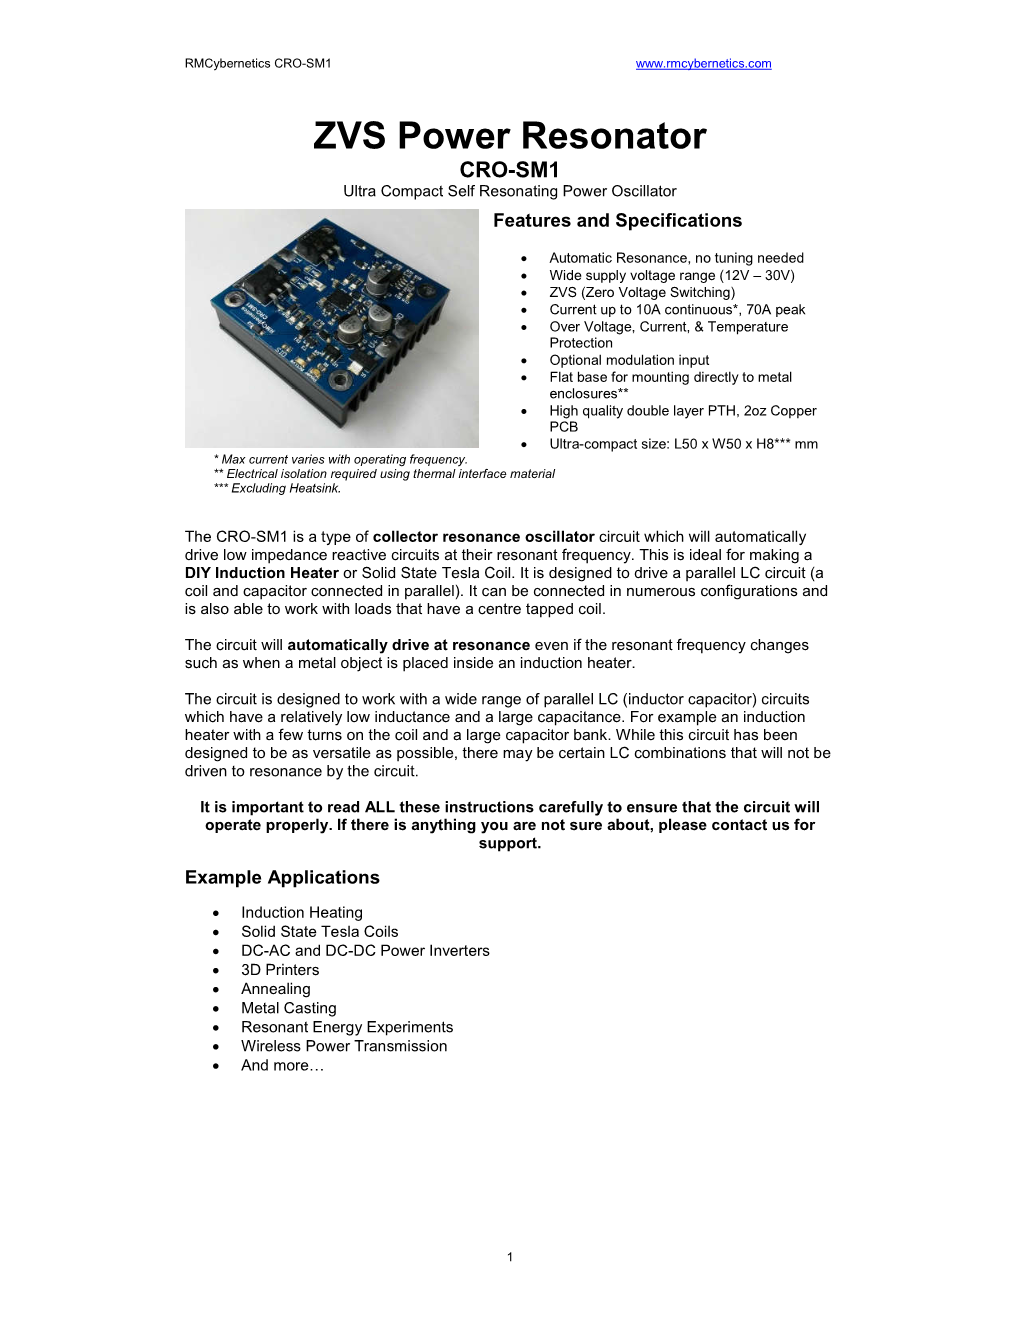 ZVS Power Resonator CRO-SM1 Ultra Compact Self Resonating Power Oscillator Features and Specifications